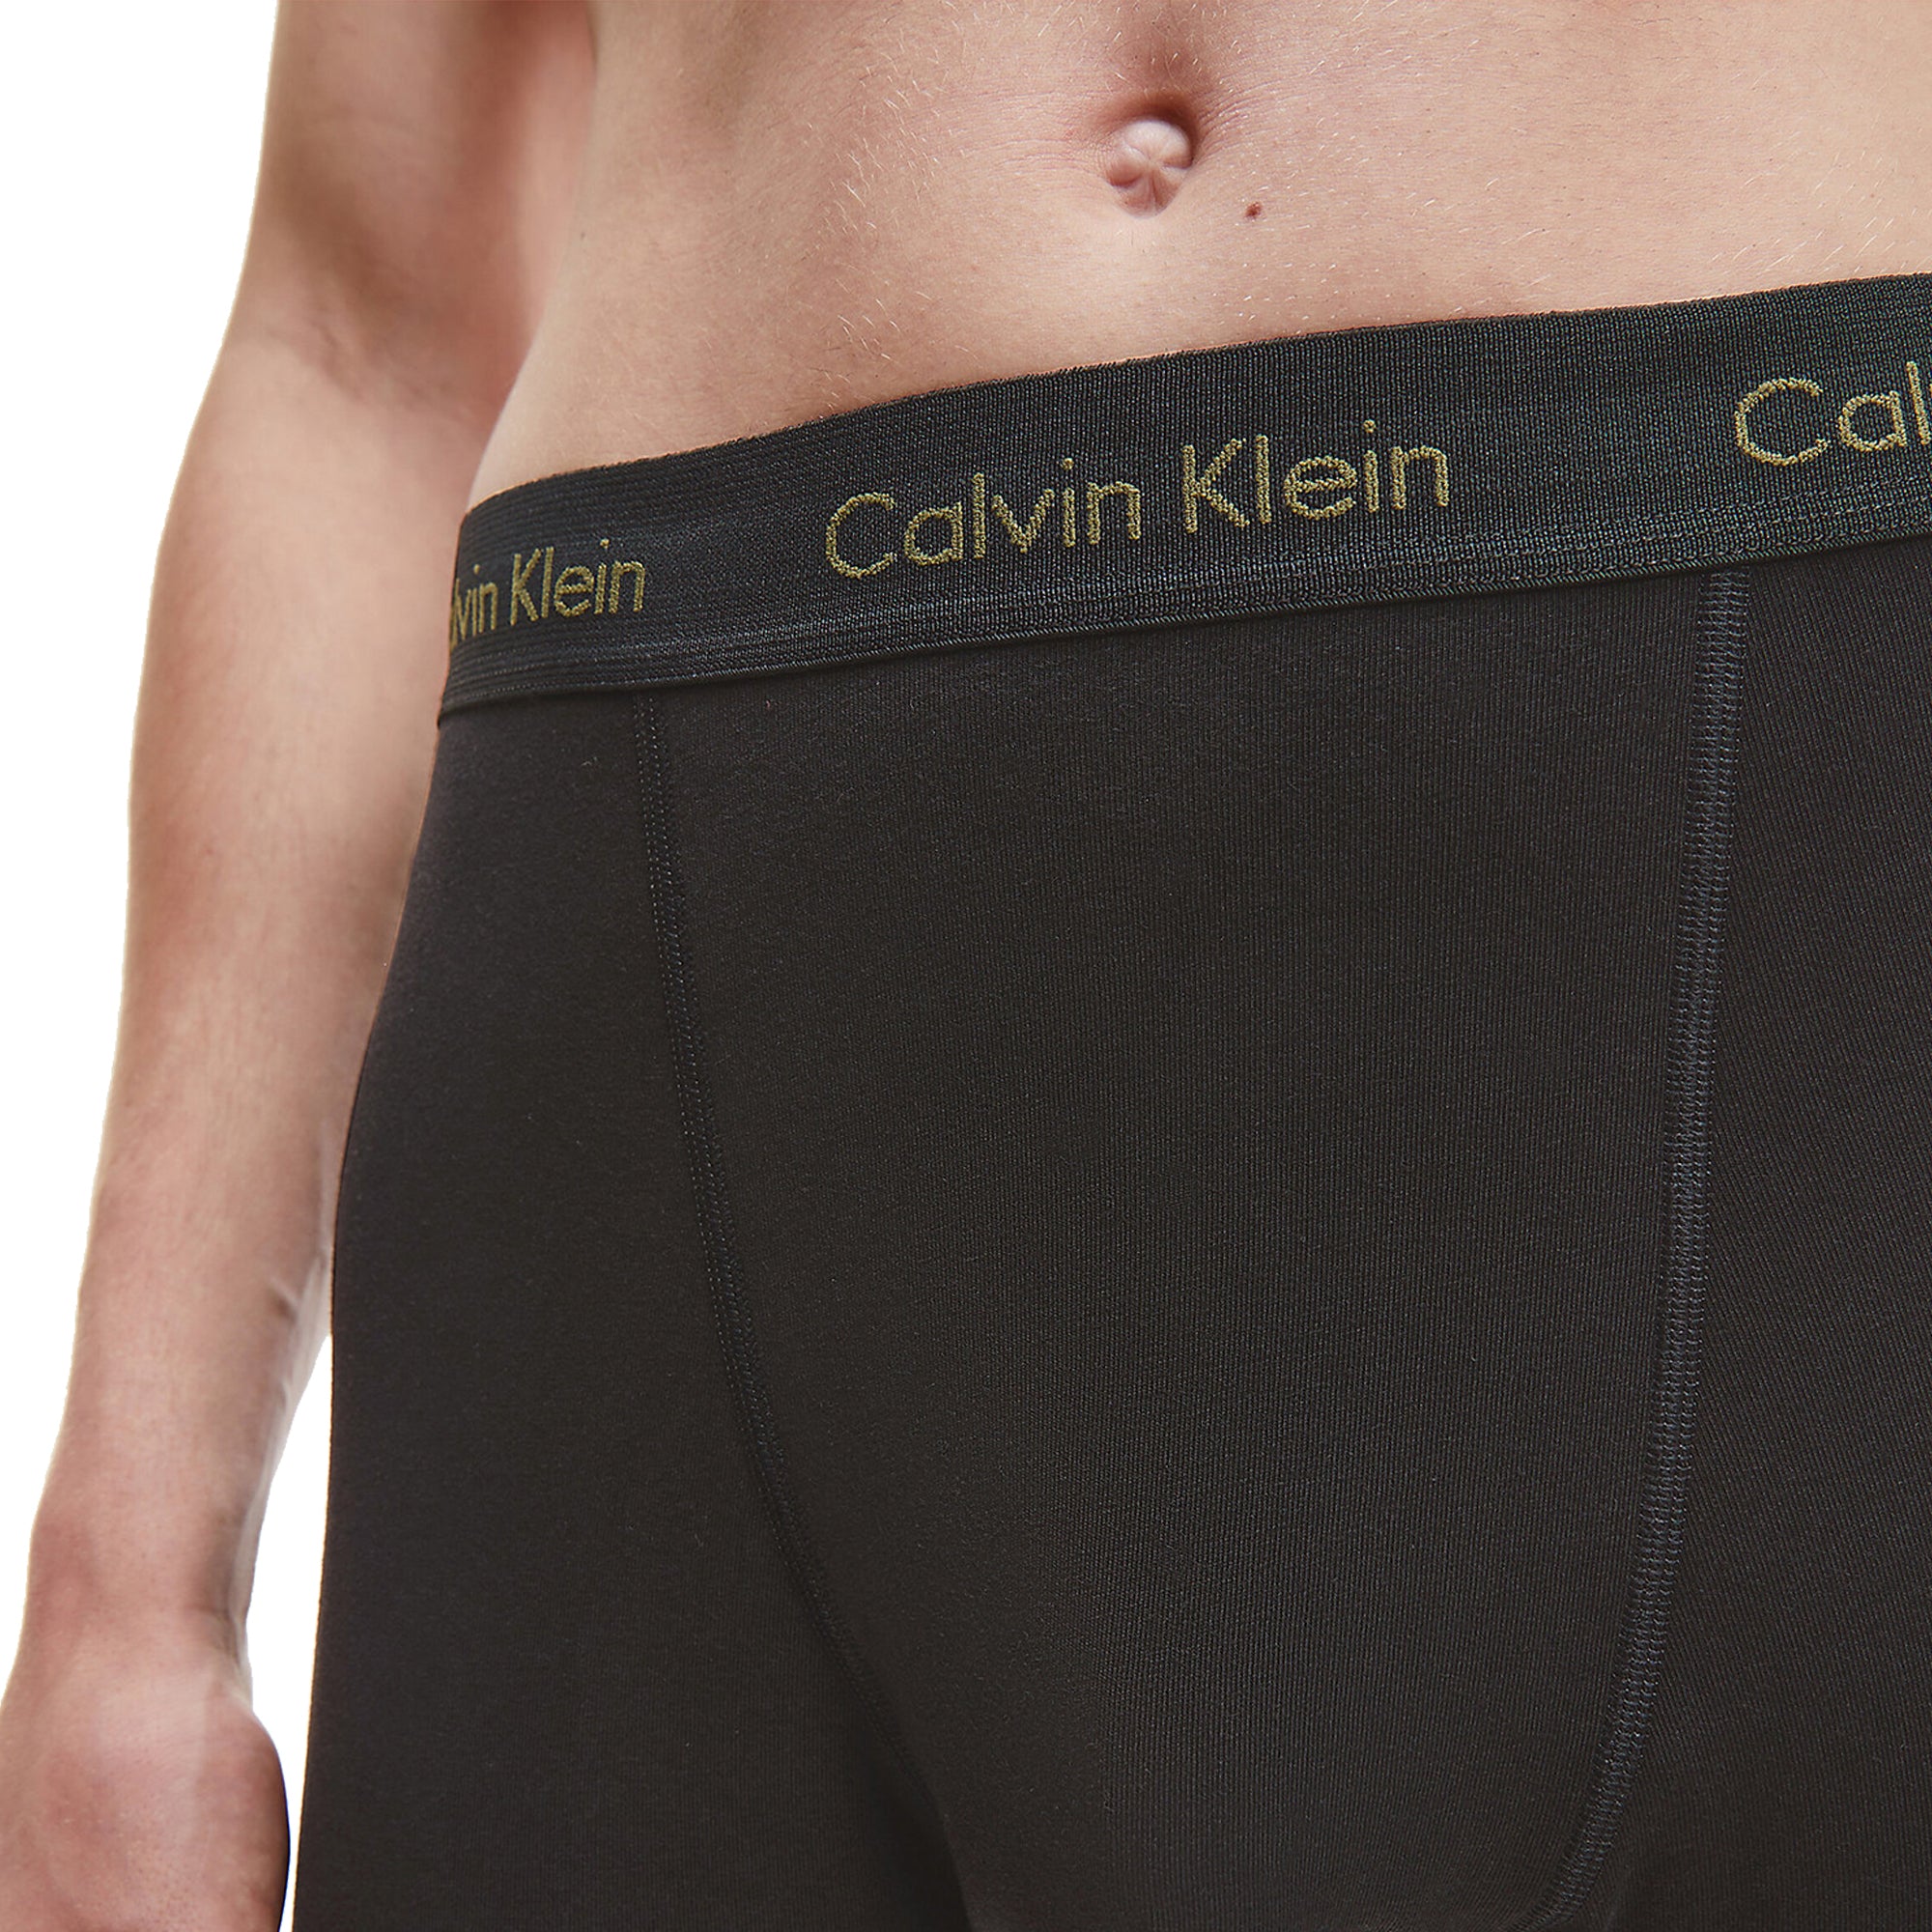 Calvin Klein Cotton Stretch Trunks - Black with Purple/Active Blue/Army Logo